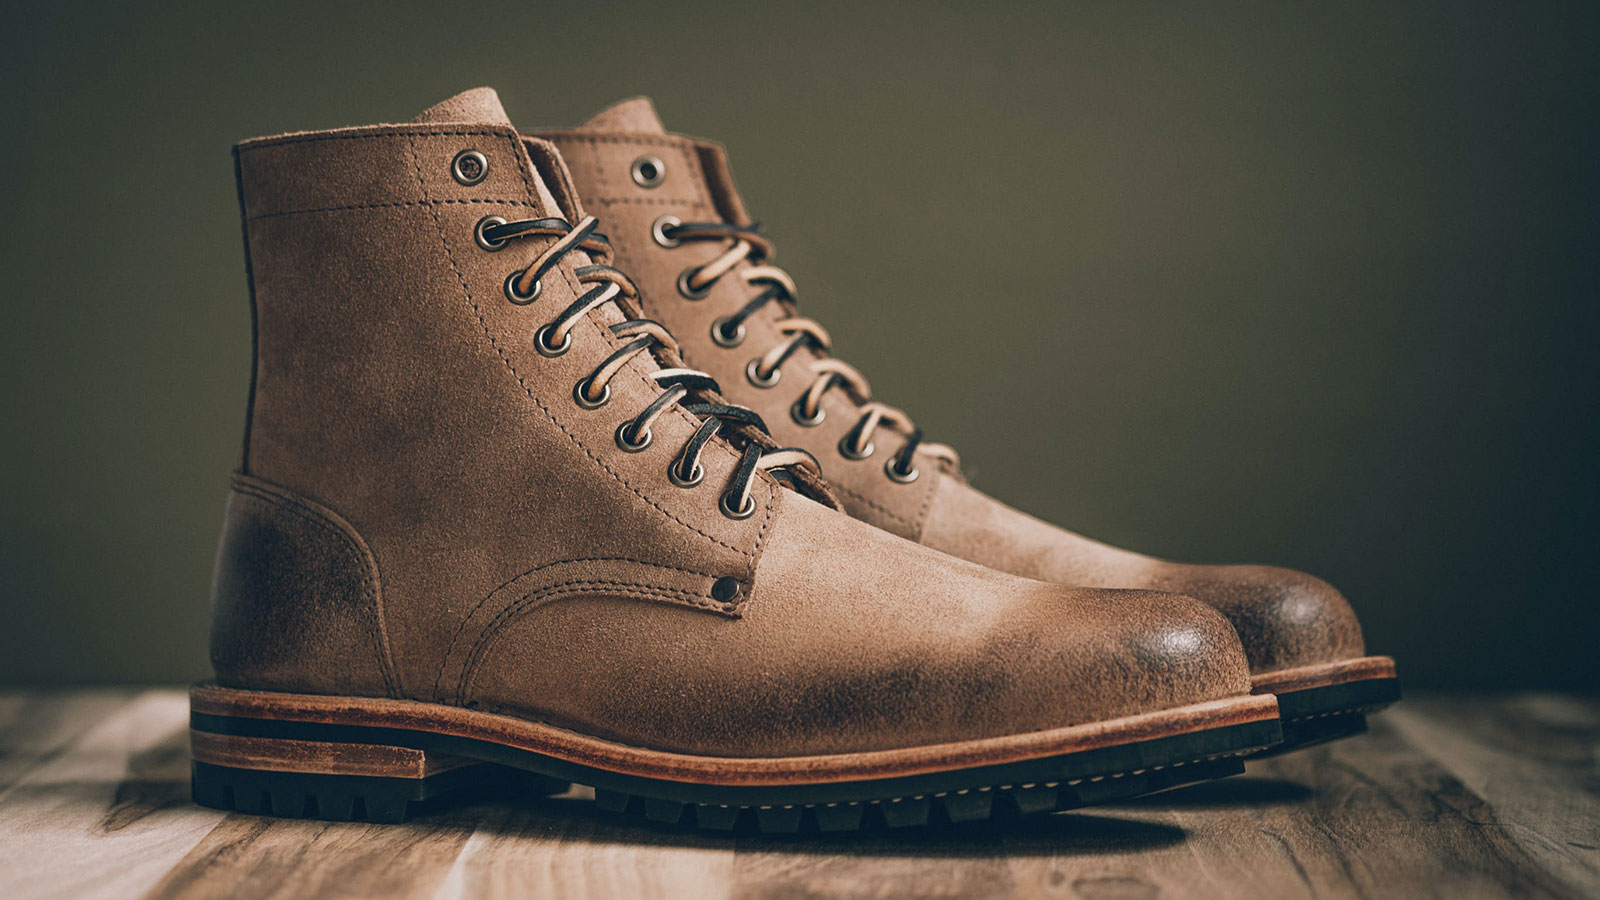 Inspired By The M1918 Boot From WWI, Oak Street Bootmakers